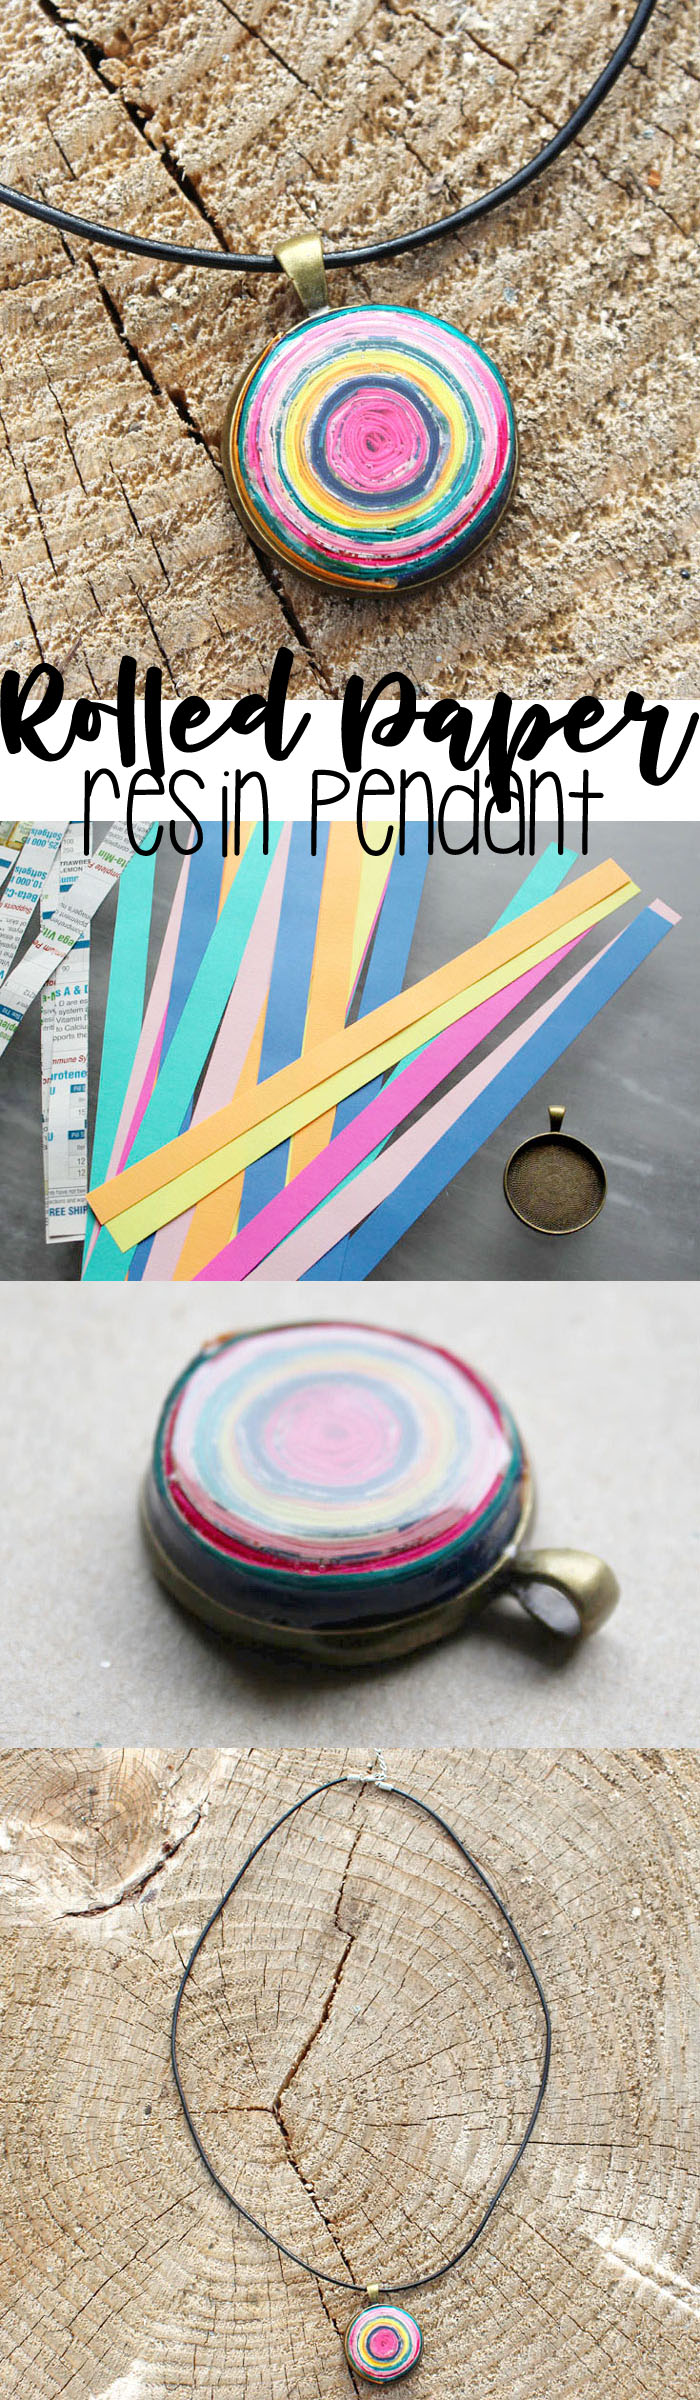 Make a stunning necklace with brightly colored rolled paper, magazines and junk mail!  Coat it with jewelry resin for a stunning finish!  Upcycled crafts! via @resincraftsblog